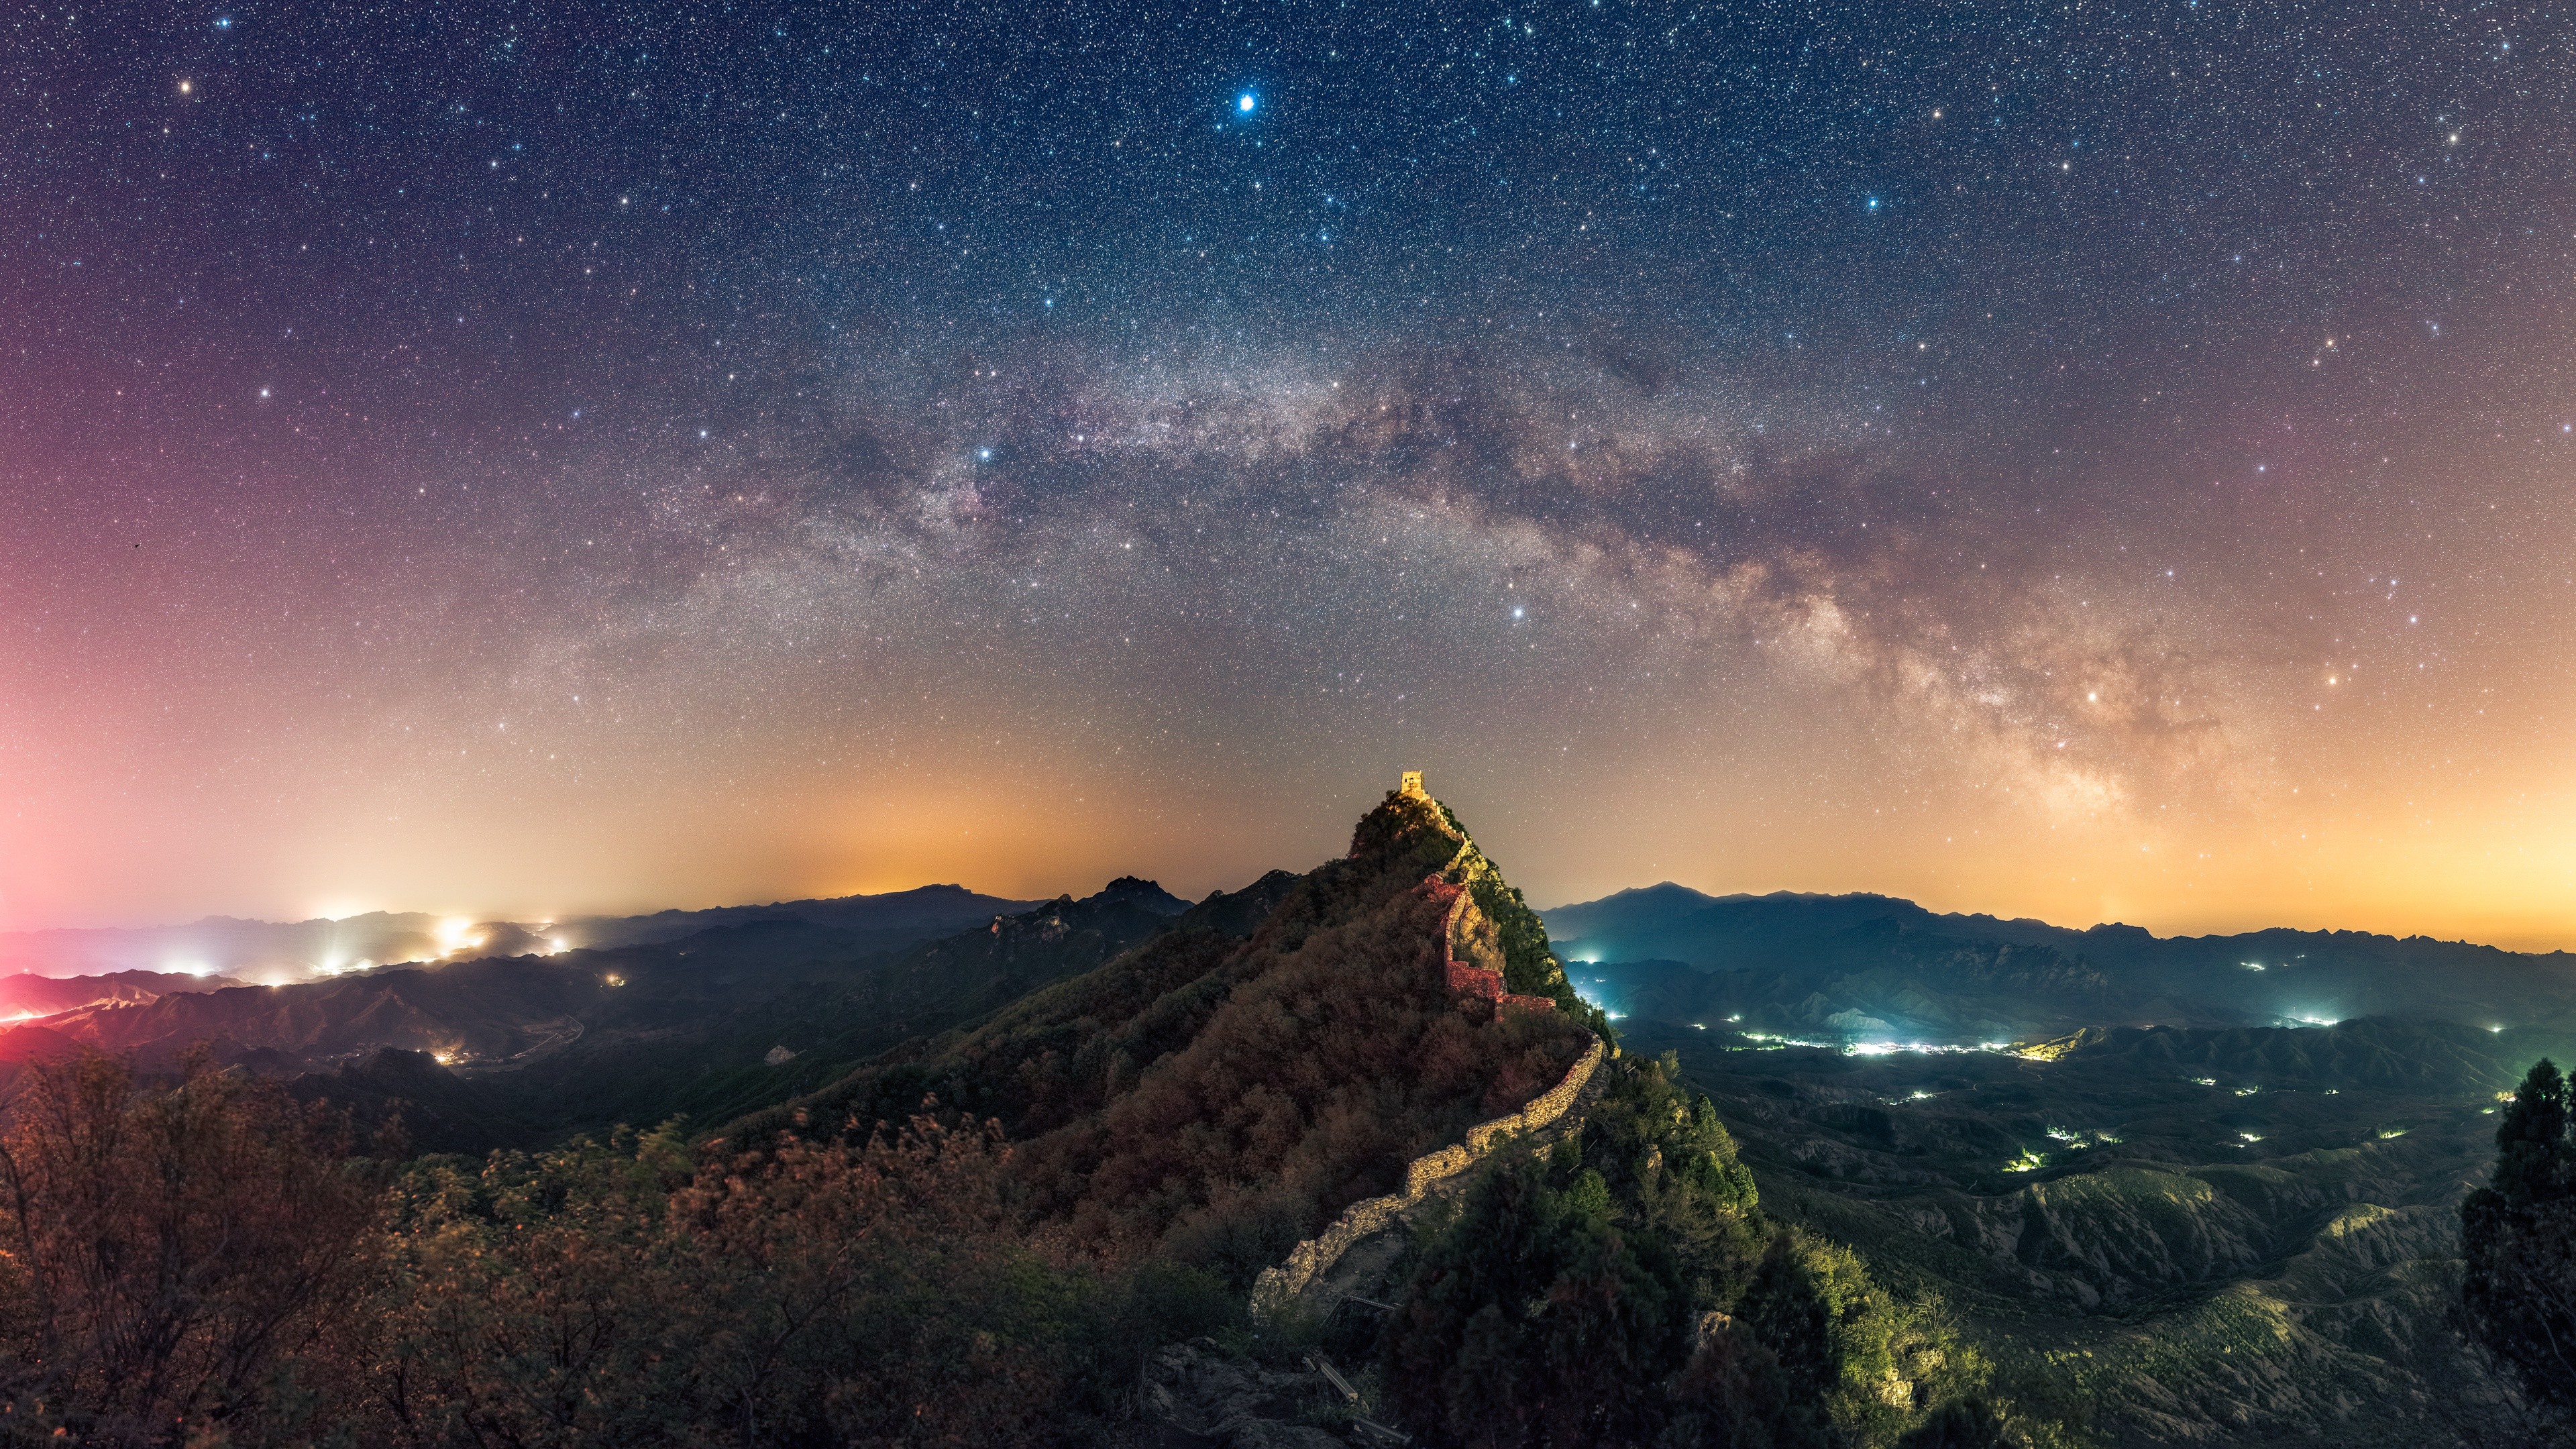 3840x2160 Wallpaper Stars Nature Mountains The Great Wall of China Sky Scenery   Landscape photography